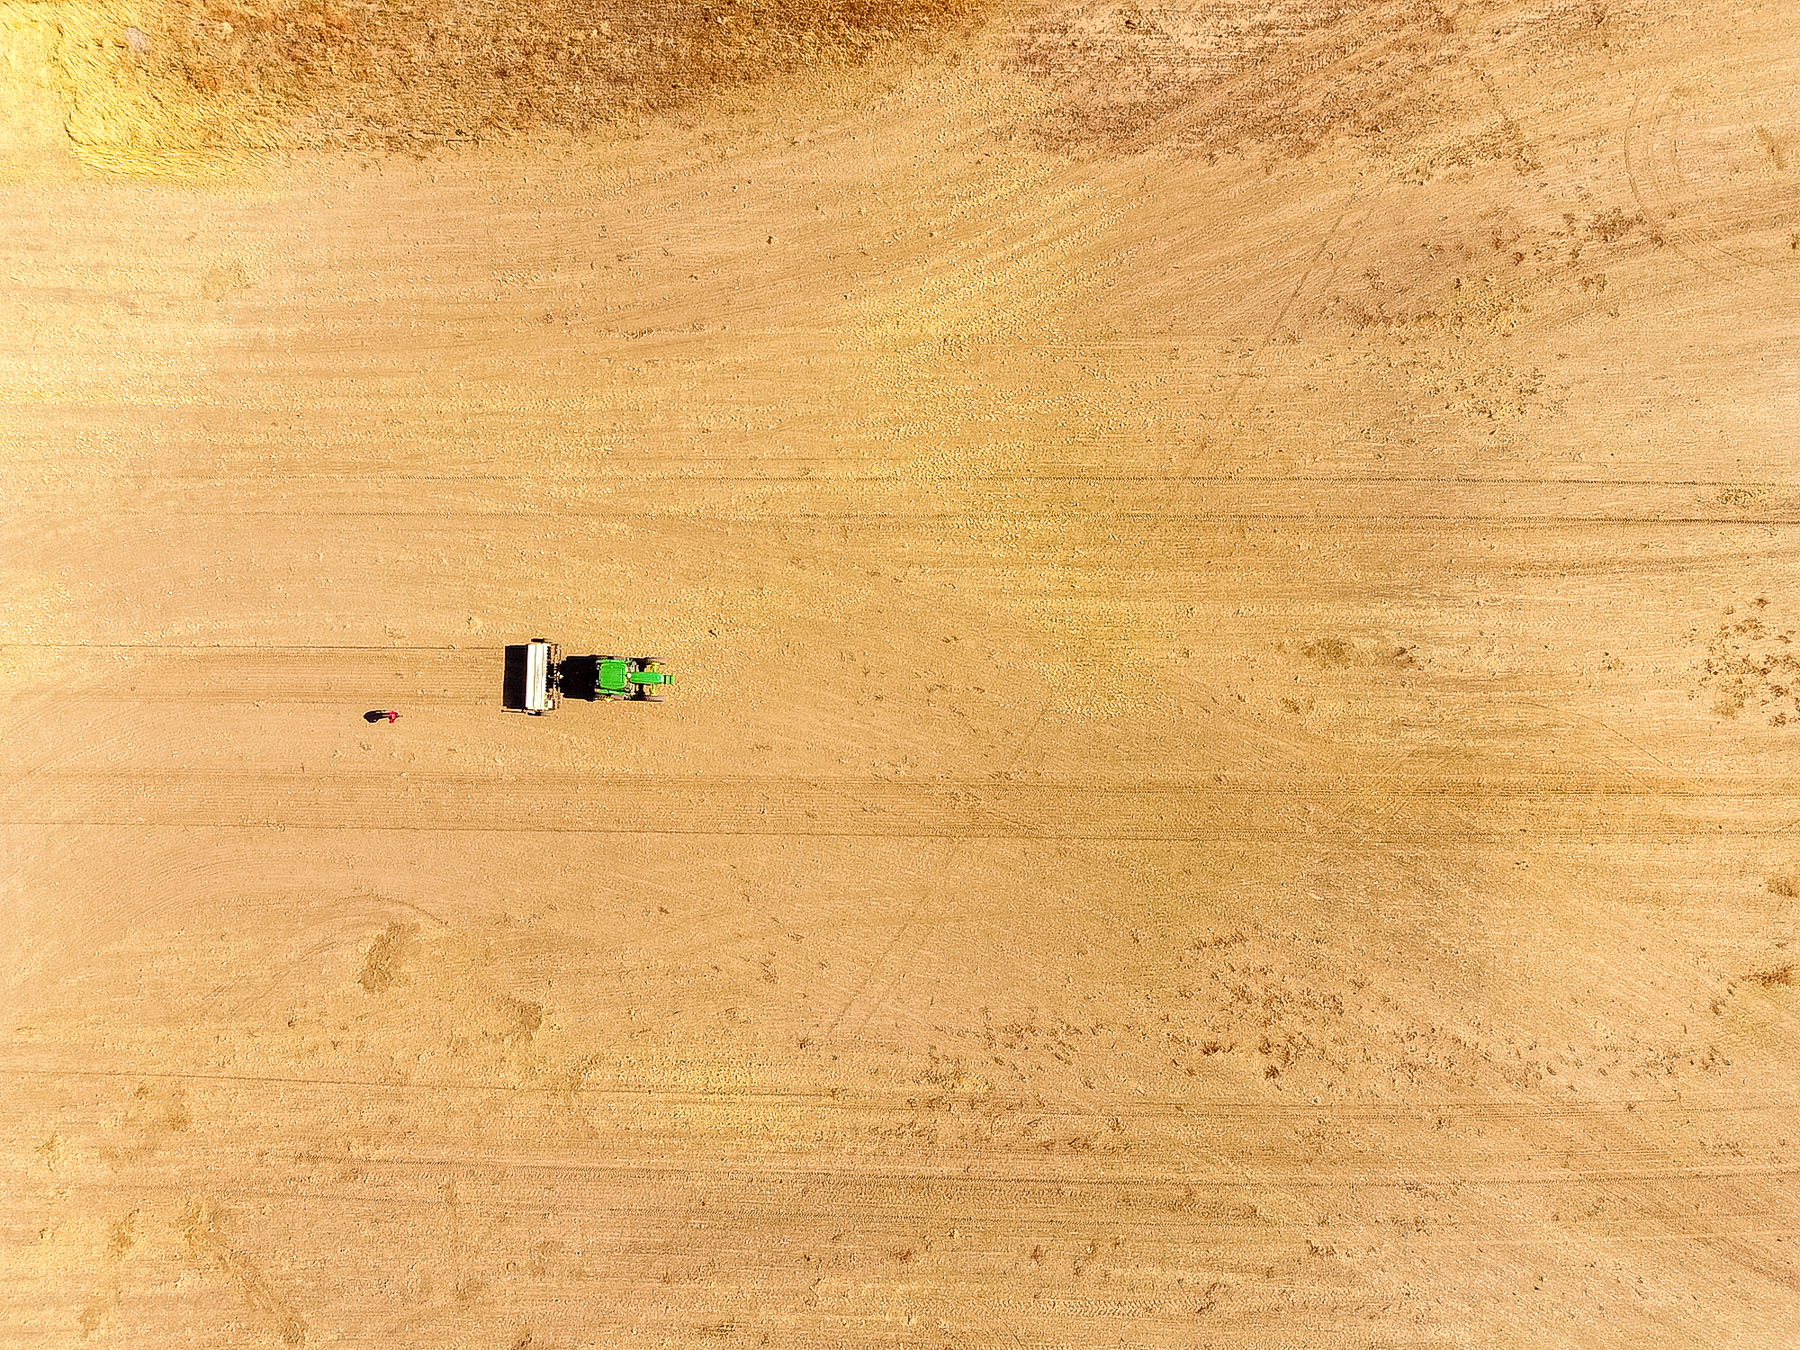 Aerial view of a tractor in a field.